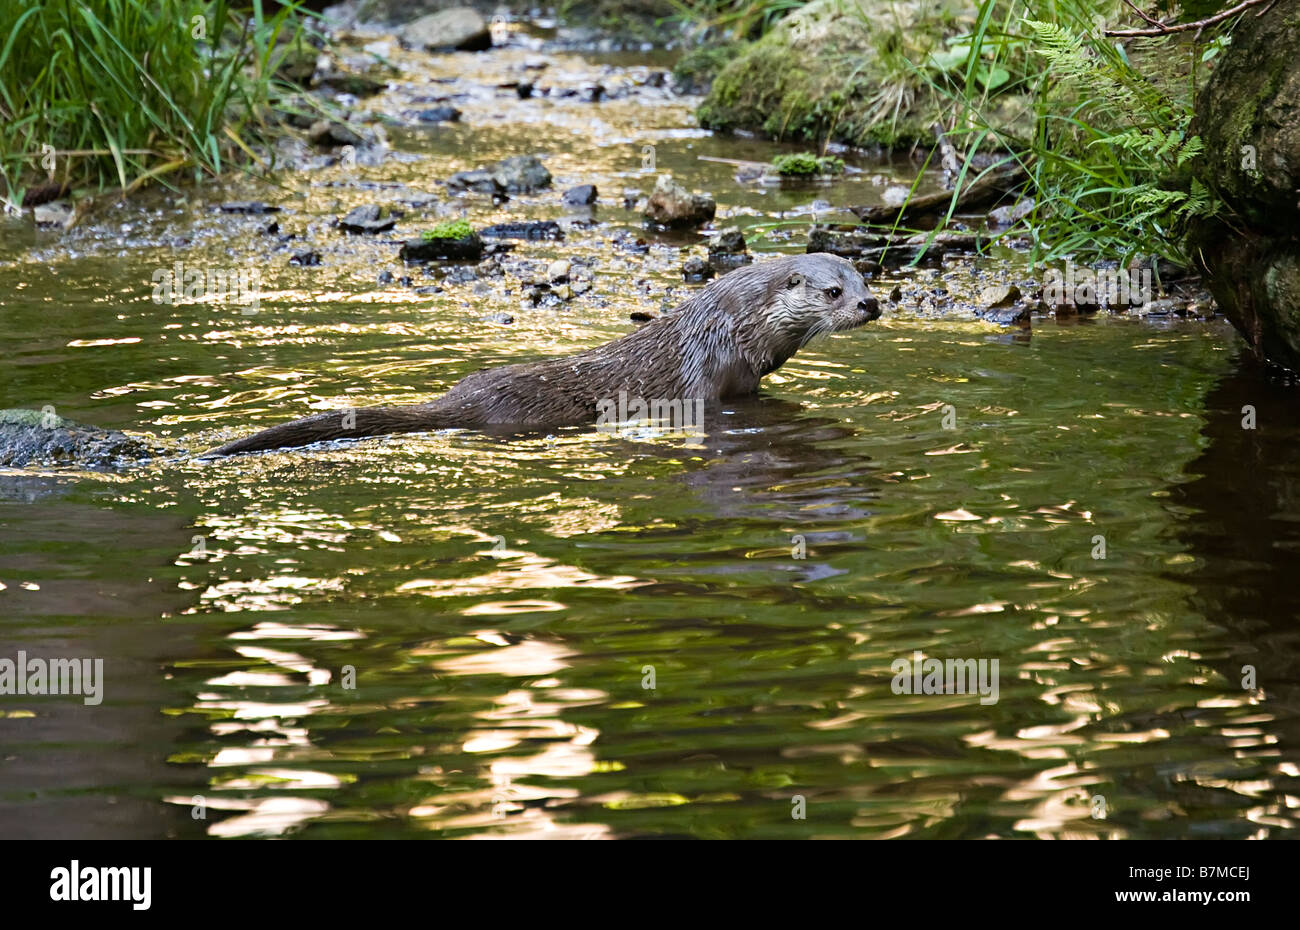 River otter Lutra lutra in pool Tier-Freigelande forest Germany Stock Photo